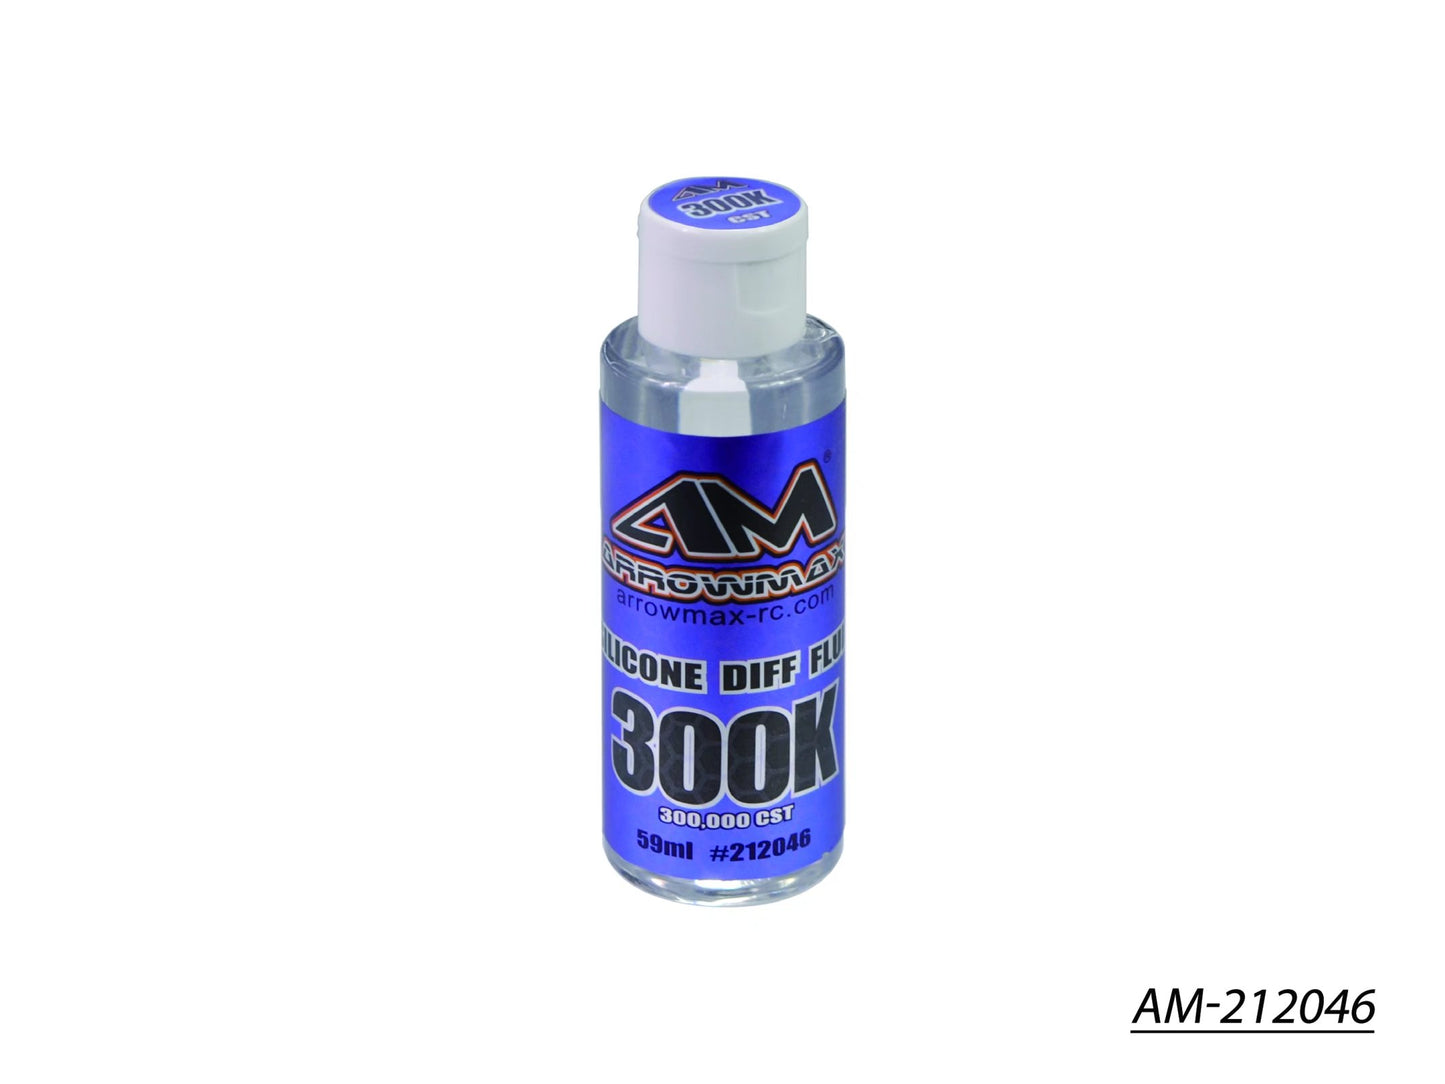 Silicone Diff Fluid 59ml 300.000cst V2 (AM-212046)